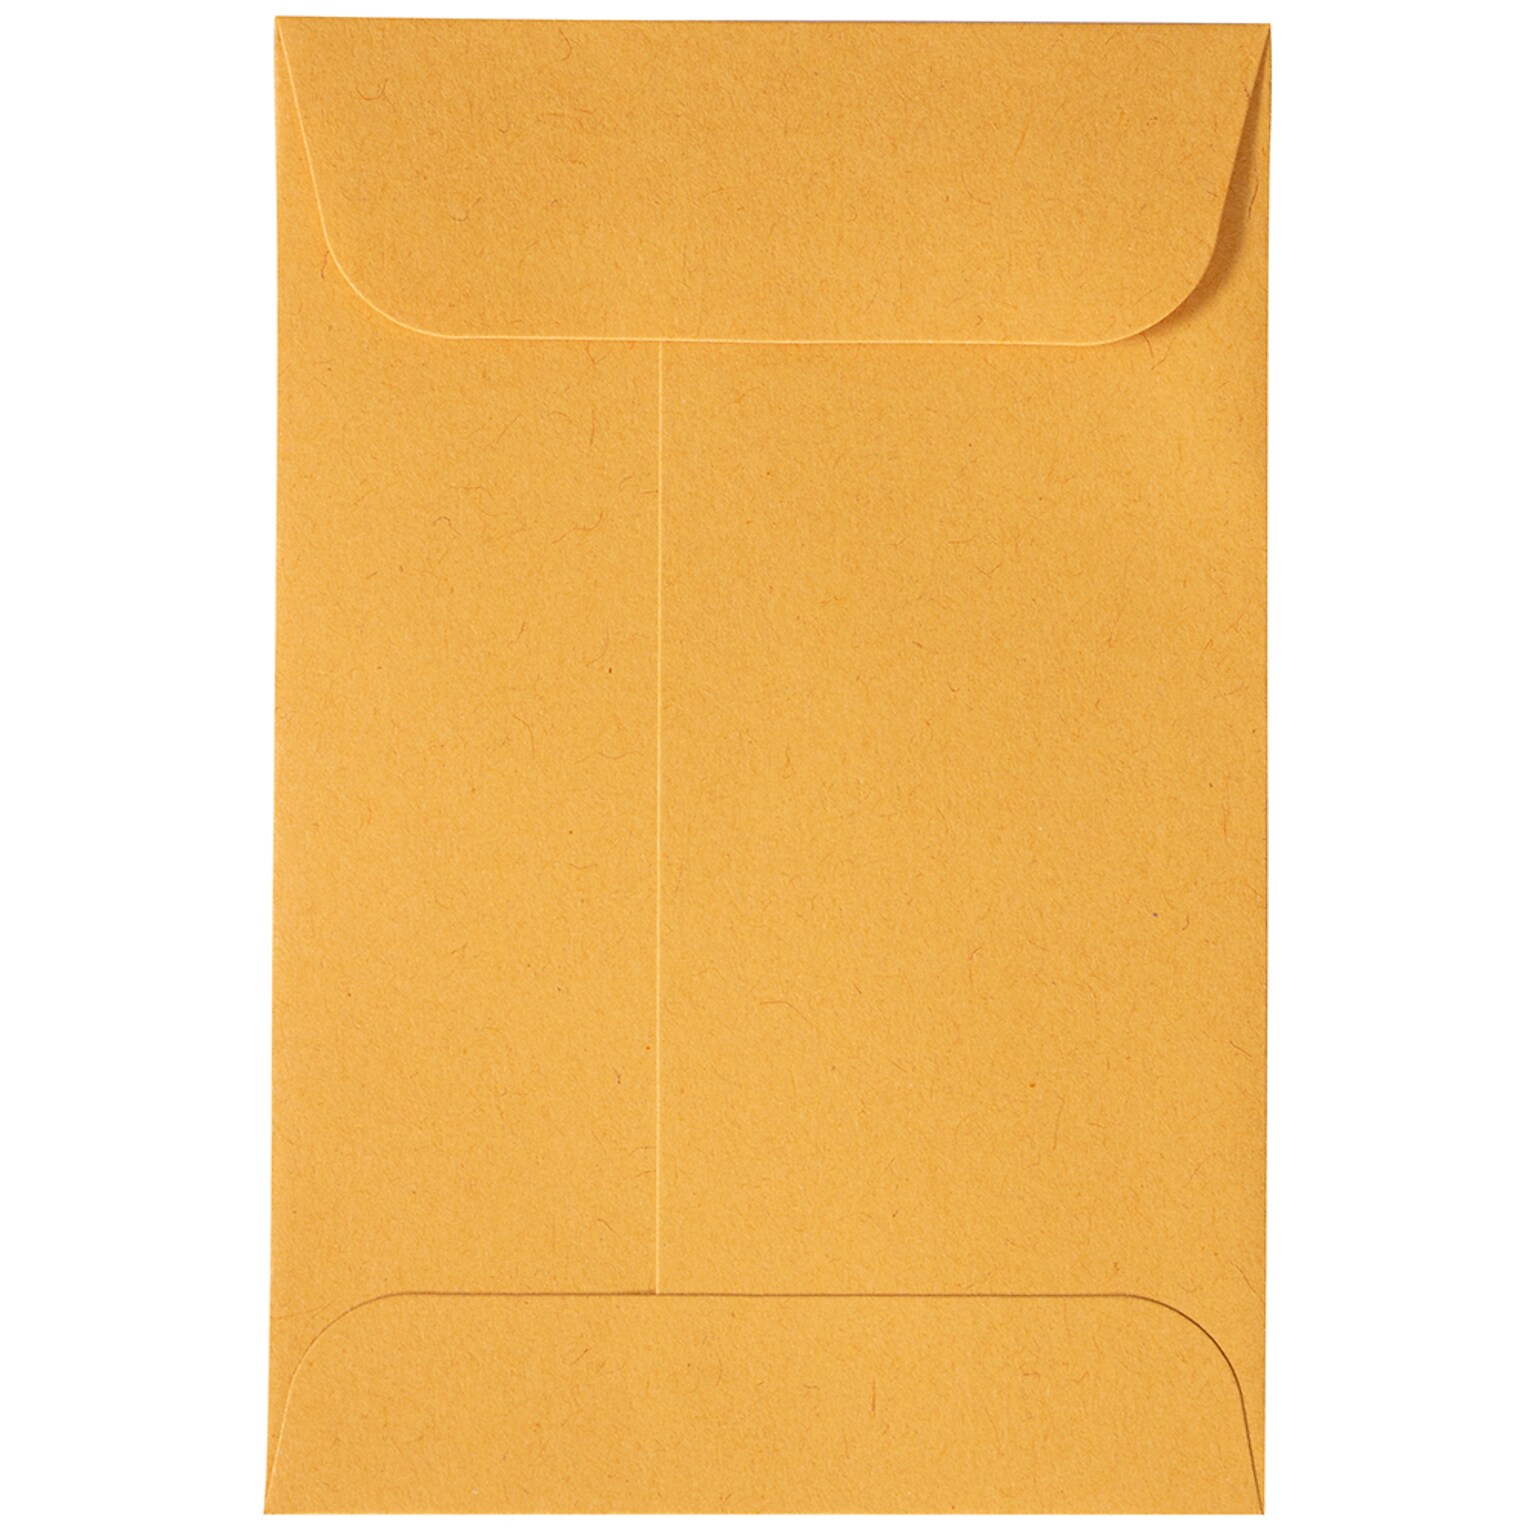 JAM Paper #4 Coin Business Commercial Envelopes with Peel & Seal Closure, 3 x 4 1/2, Brown Kraft Manila, 50/Pack (400238461I)